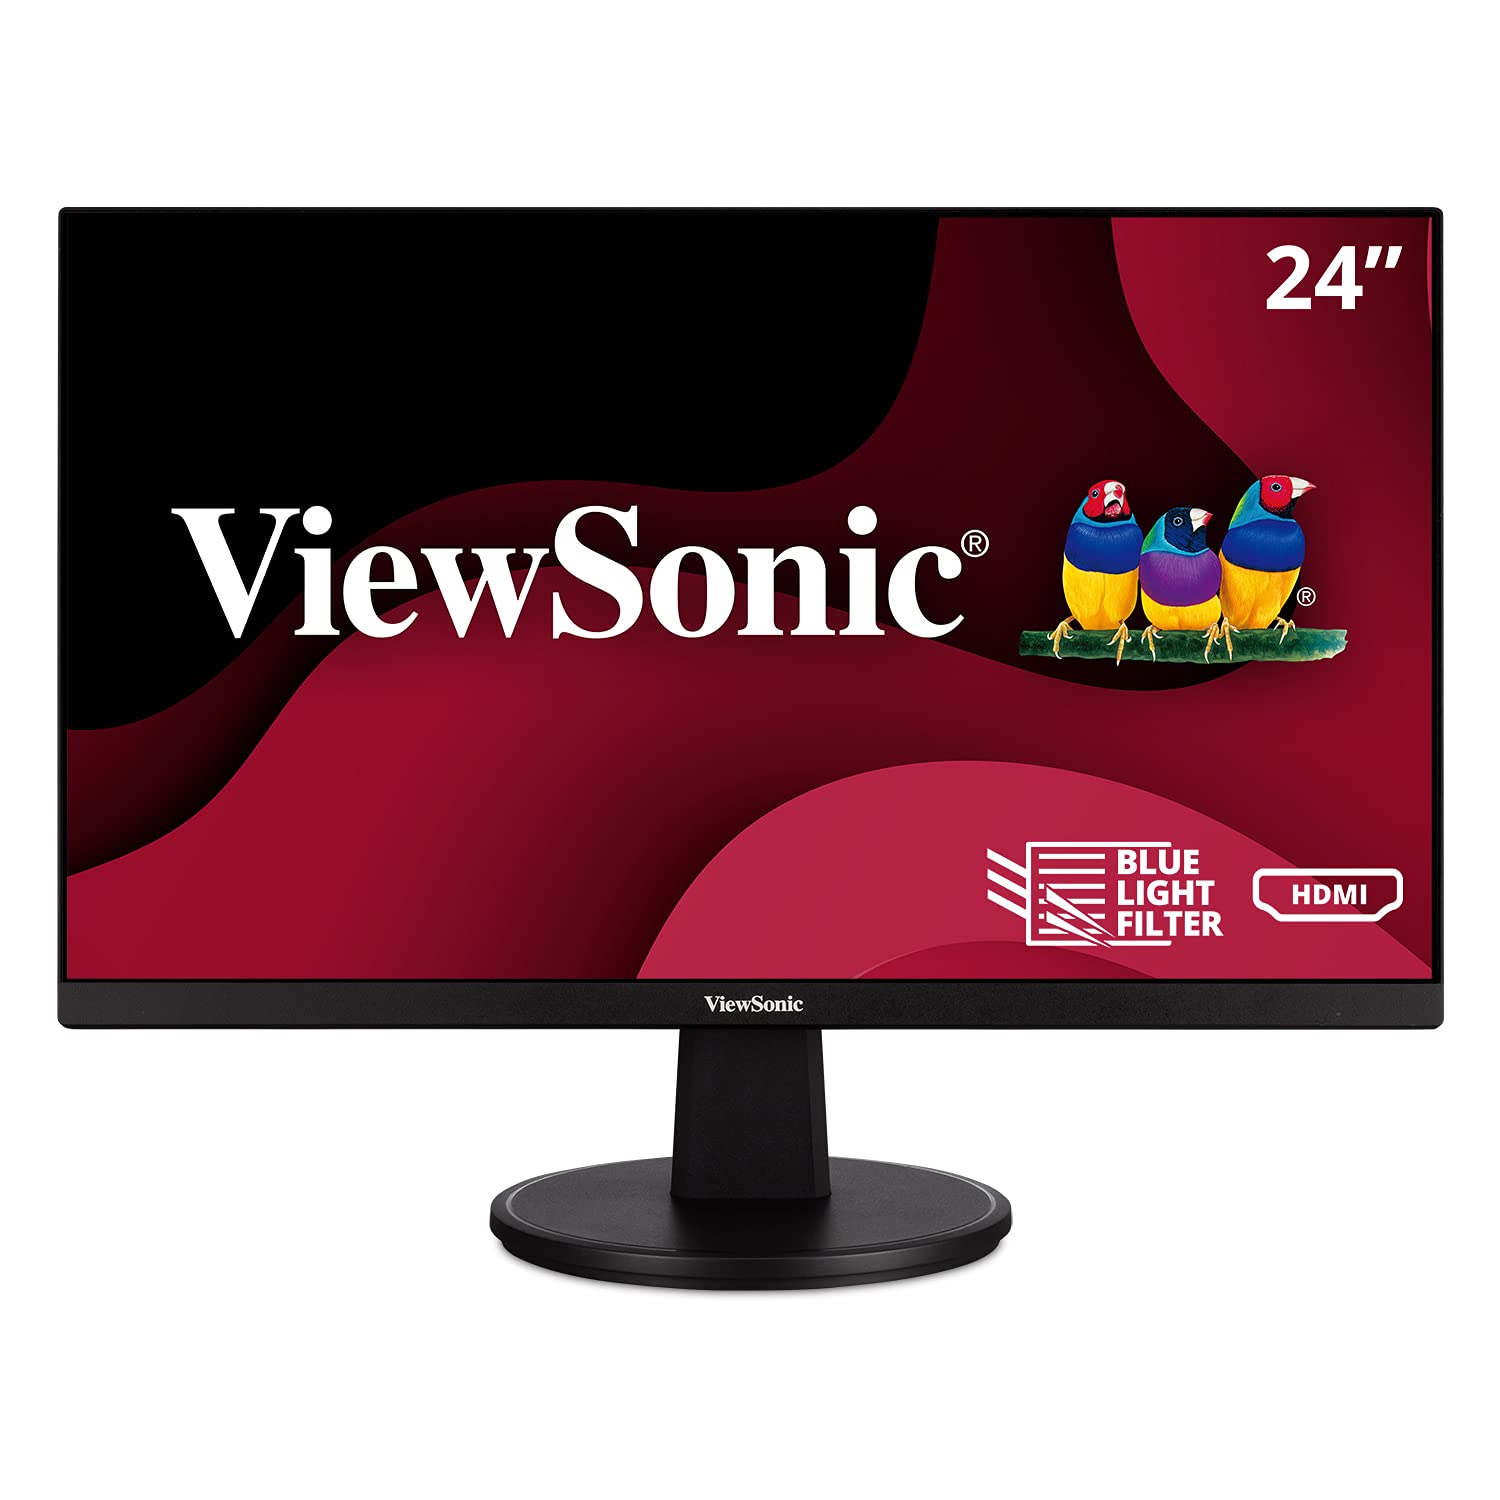 ViewSonic VA2447-MH 24 Inch Full HD 1080p Monitor with Ultra-Thin Bezel, Adaptive Sync, 60Hz, VESA, and HDMI, VGA Inputs for Home and Office (Renewed)